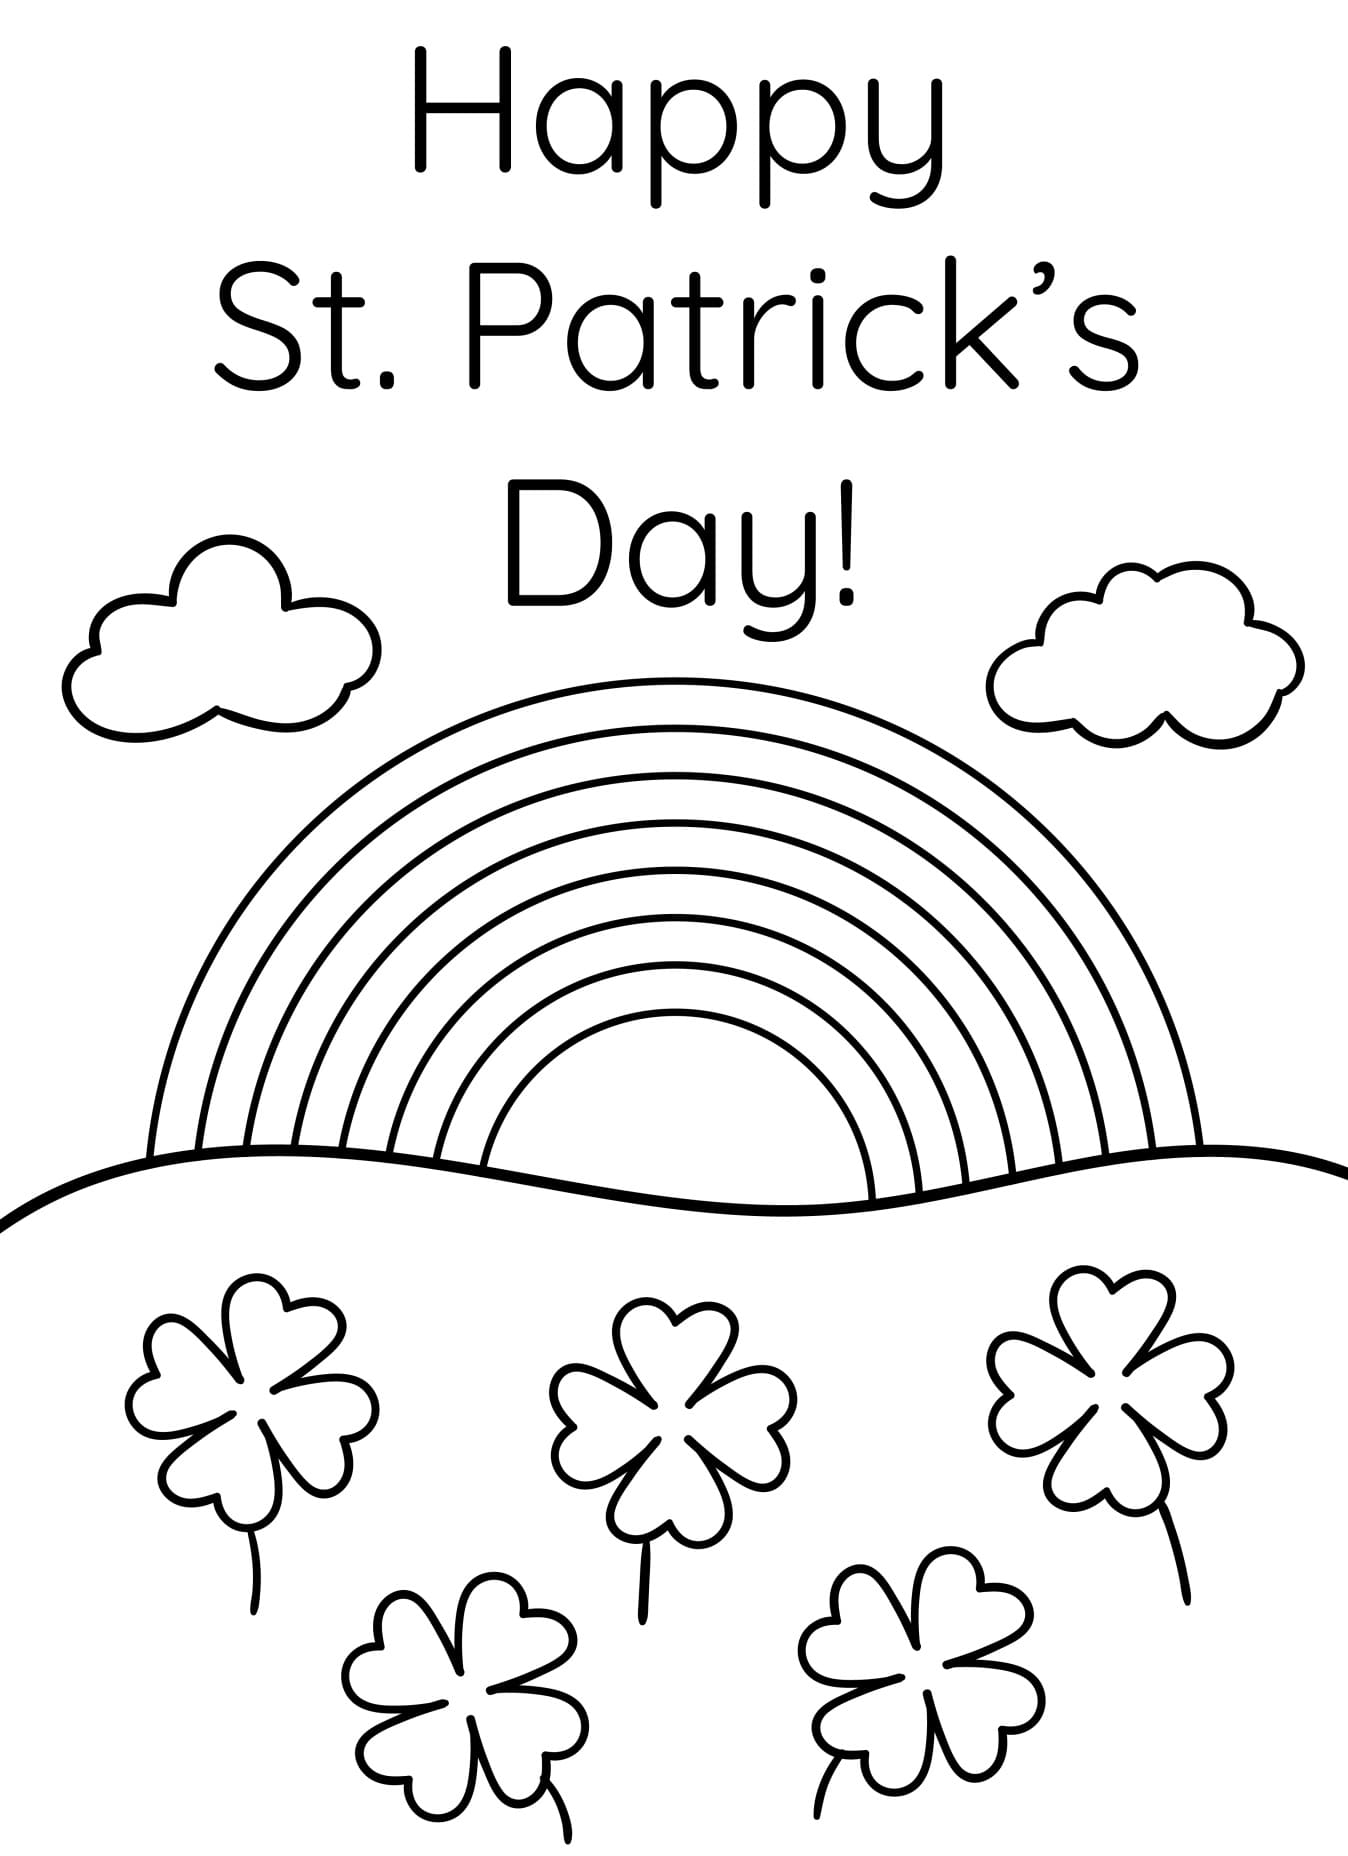 6-printable-whimsical-st-patrick-s-day-coloring-pages-for-kids